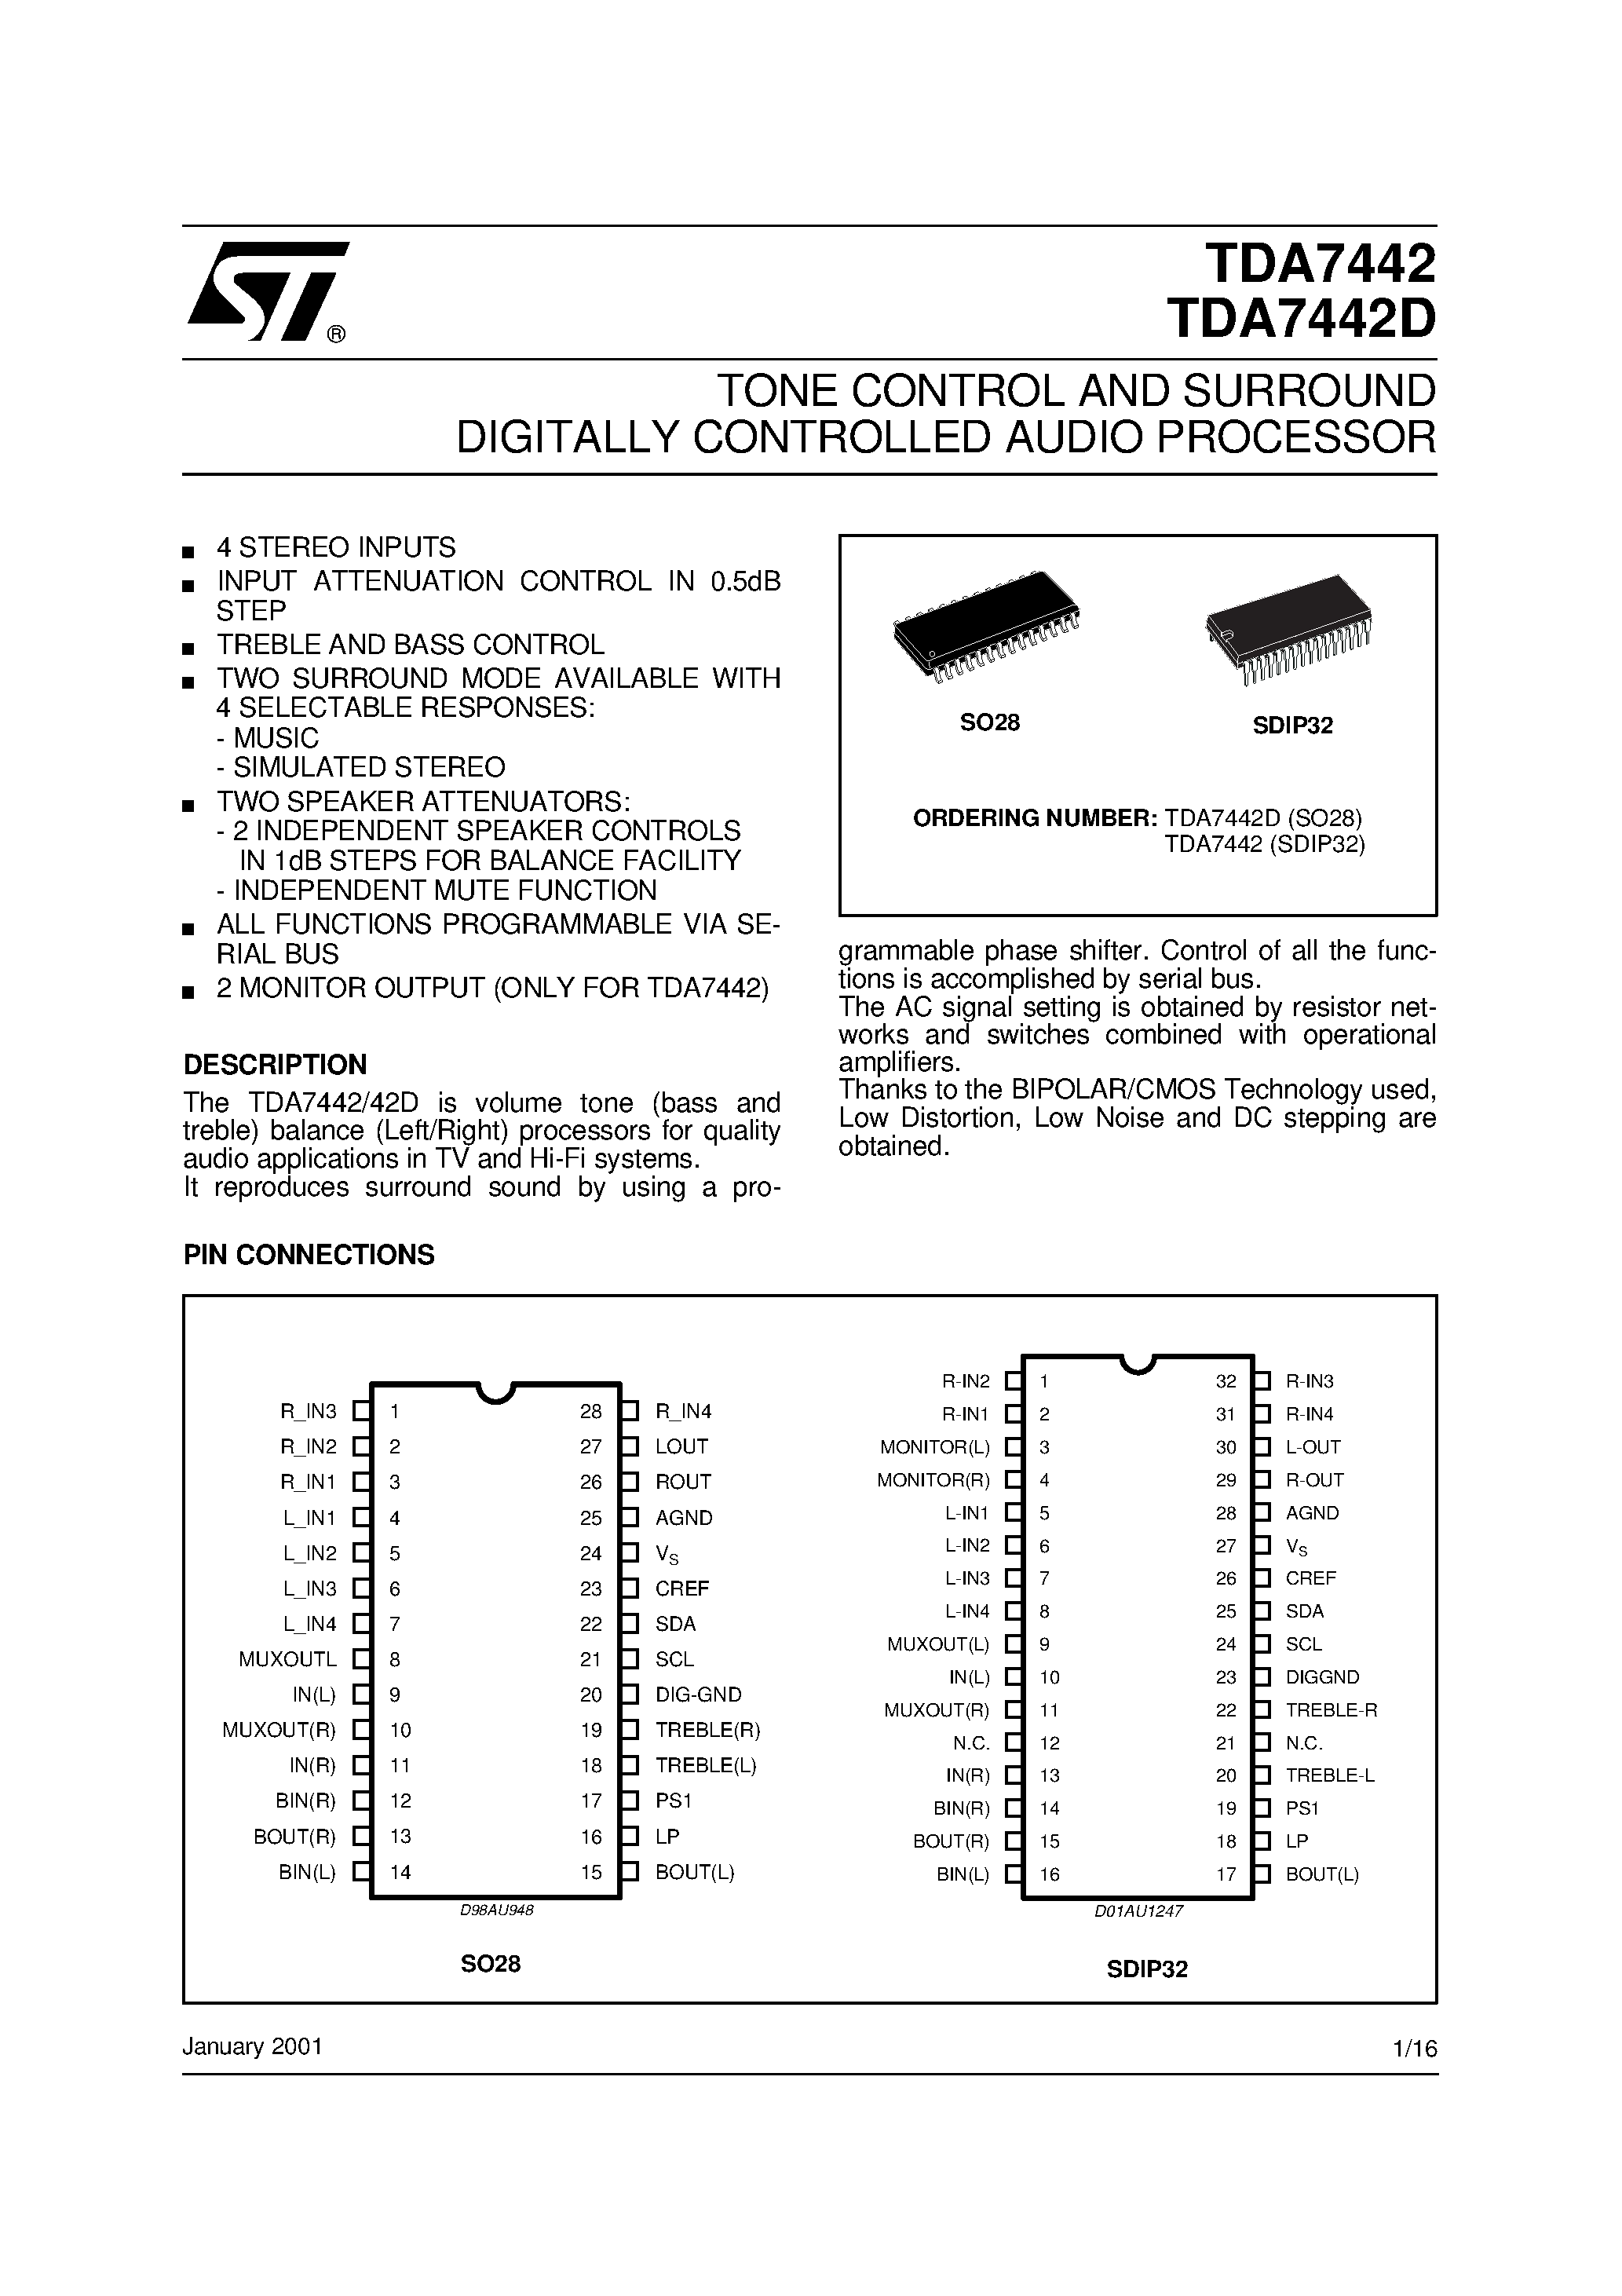 Datasheet 7442 - TONE CONTROL AND SURROUND DIGITALLY CONTROLLED AUDIO PROCESSOR page 1